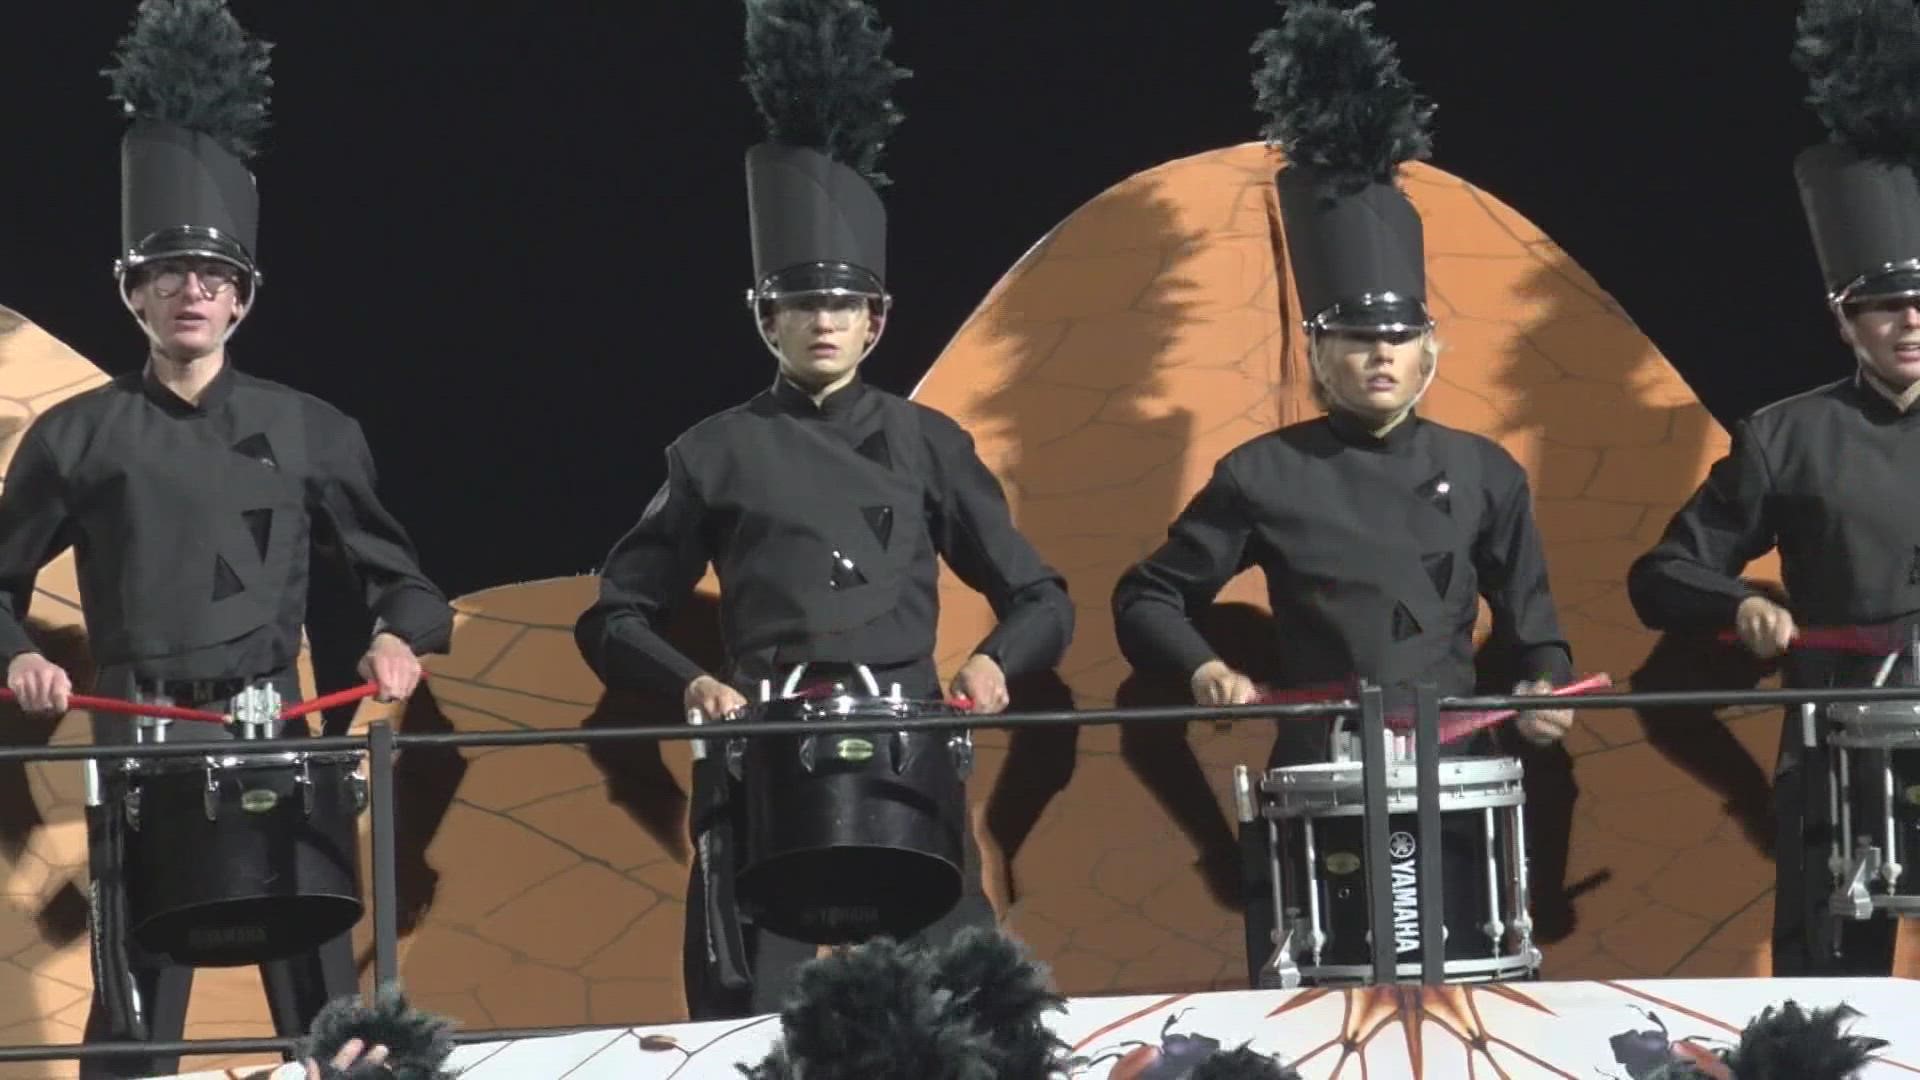 Following a performance by Rockford High School Marching Band, school officials had an announcement that would surprise even the students and parents in attendance.